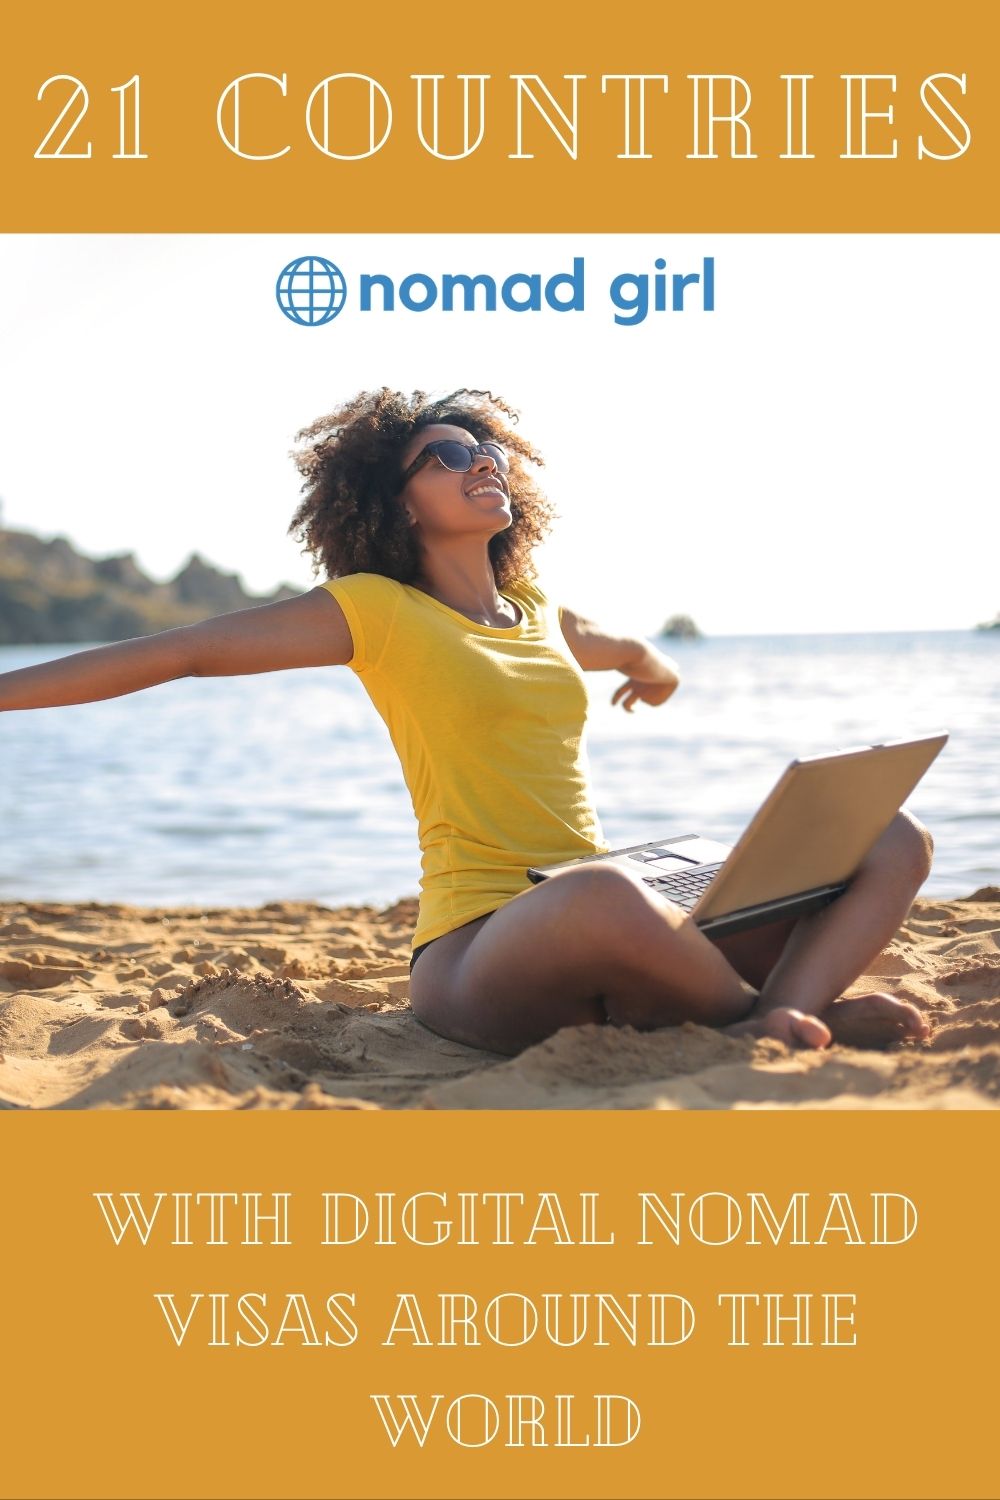 23 Countries With Digital Nomad Visas Around The World Nomad Girl